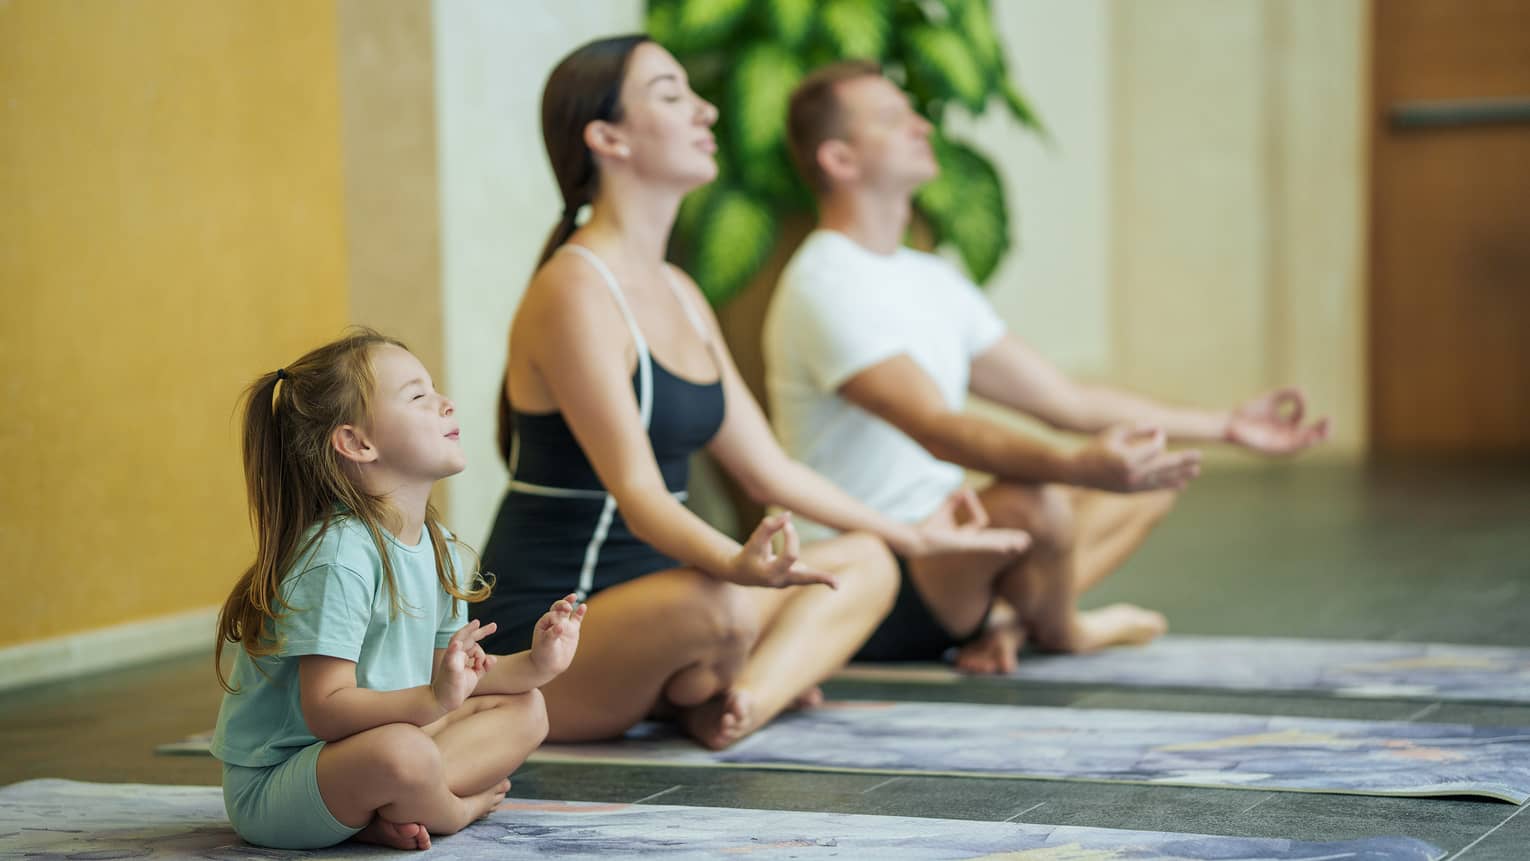 Two adults and one child each sit on a yoga mat with their legs crossed, eyes closed and hands held on their knees